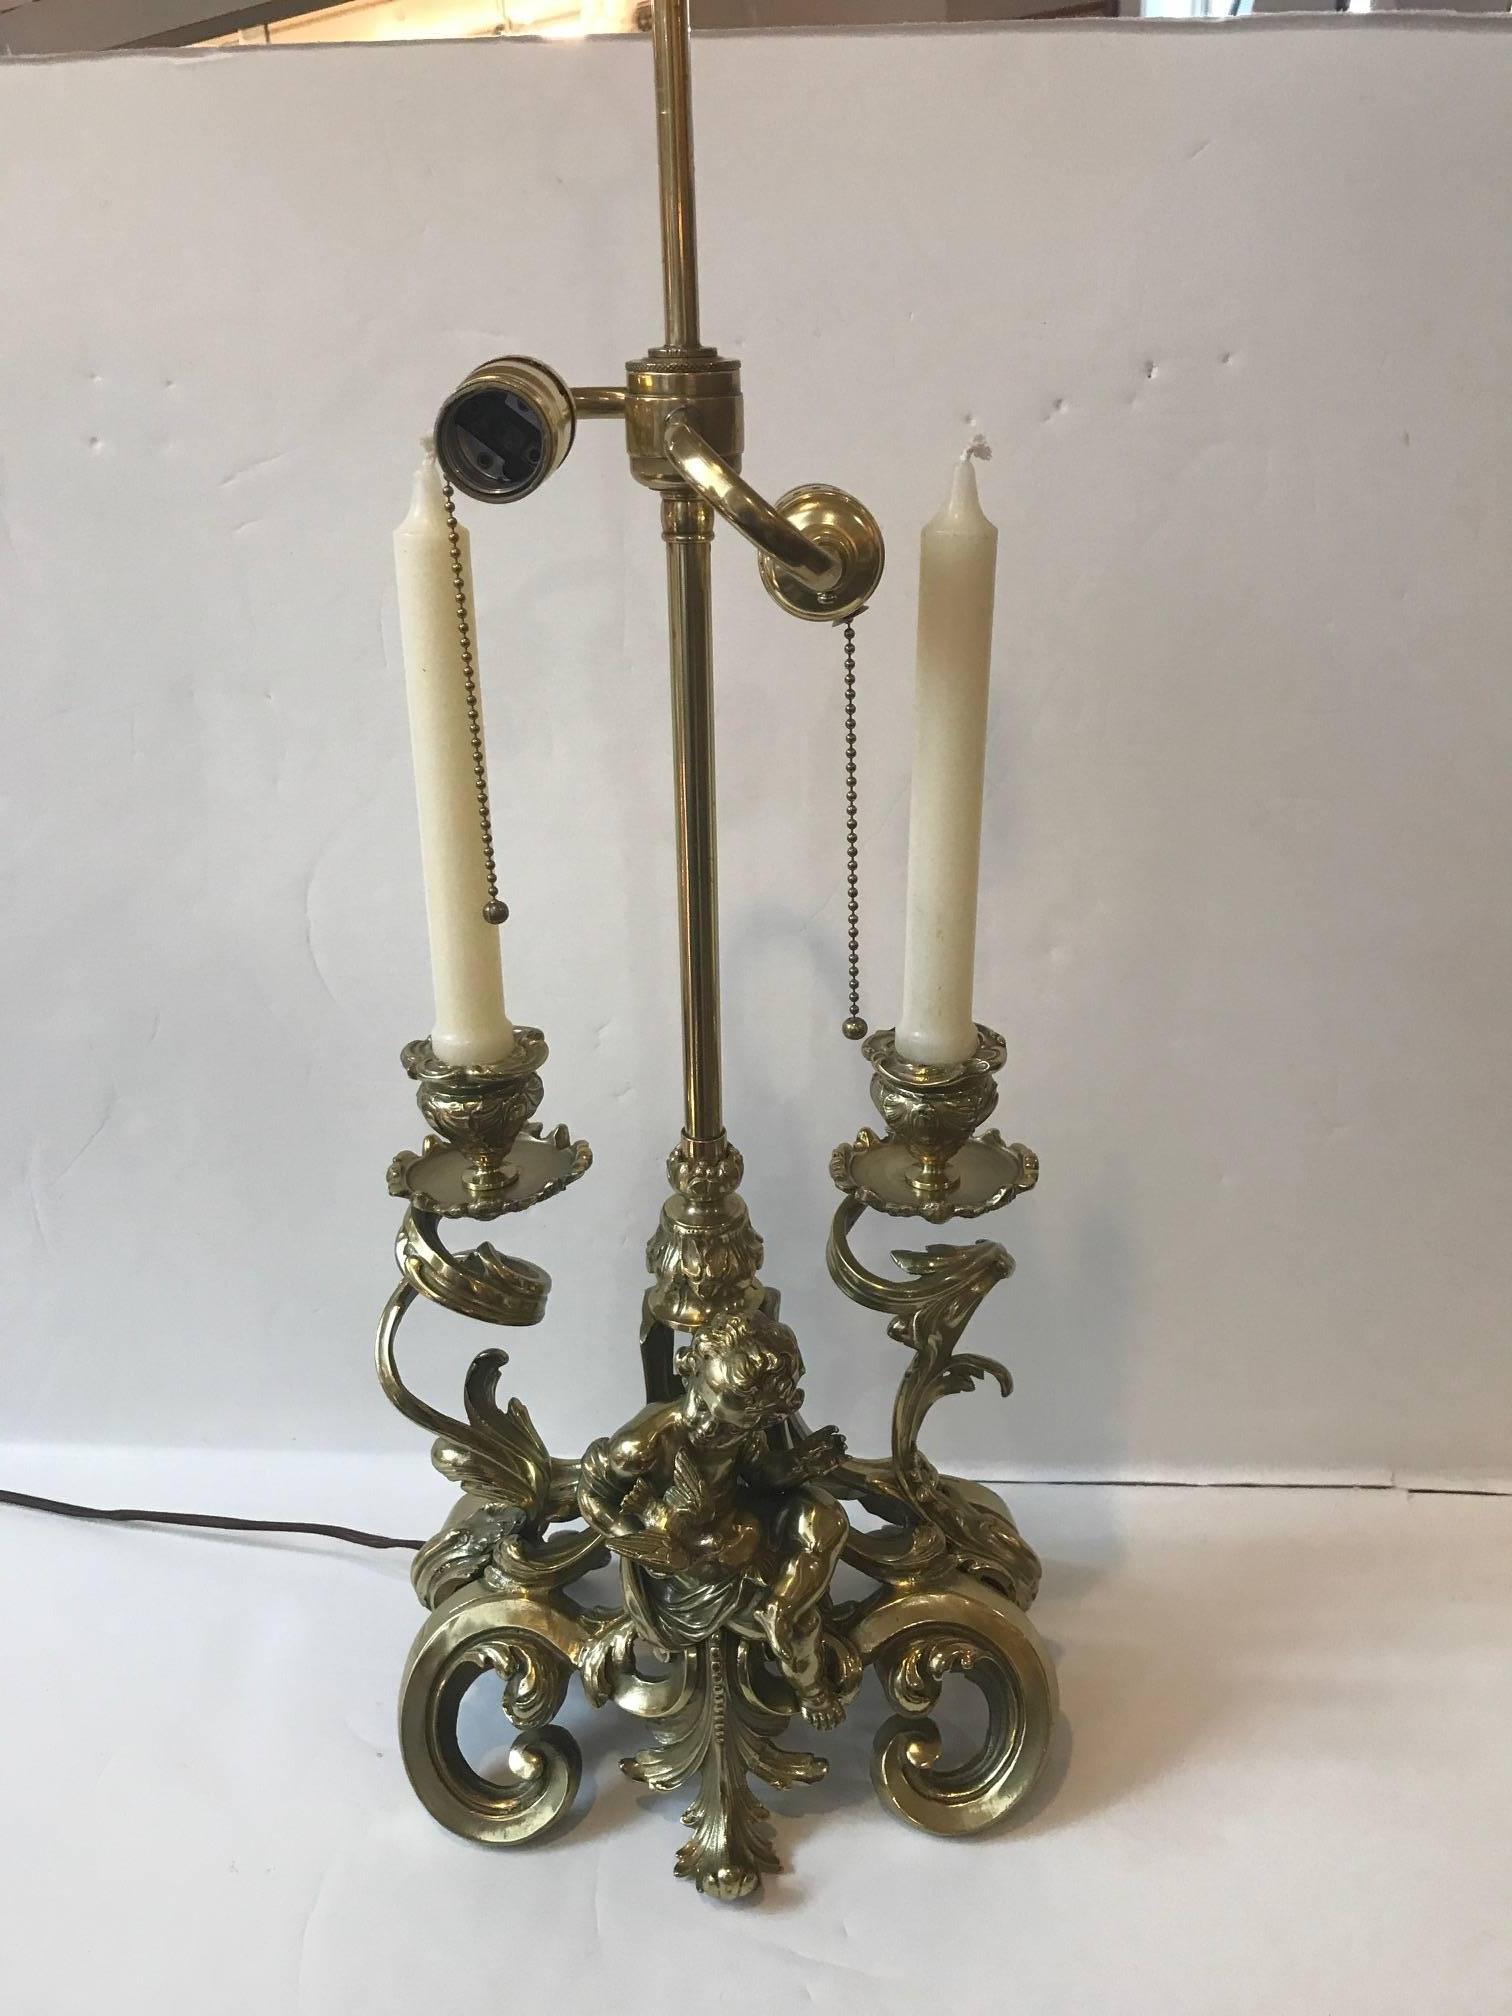 19th century polished bronze candelabra bouillotte lamp. Beautifully cast bronze made in France in the Louis XV style, originally a candle lamp, now electrified. The hand-painted tole shade in an iron red with hand gilt decoration. The central putti